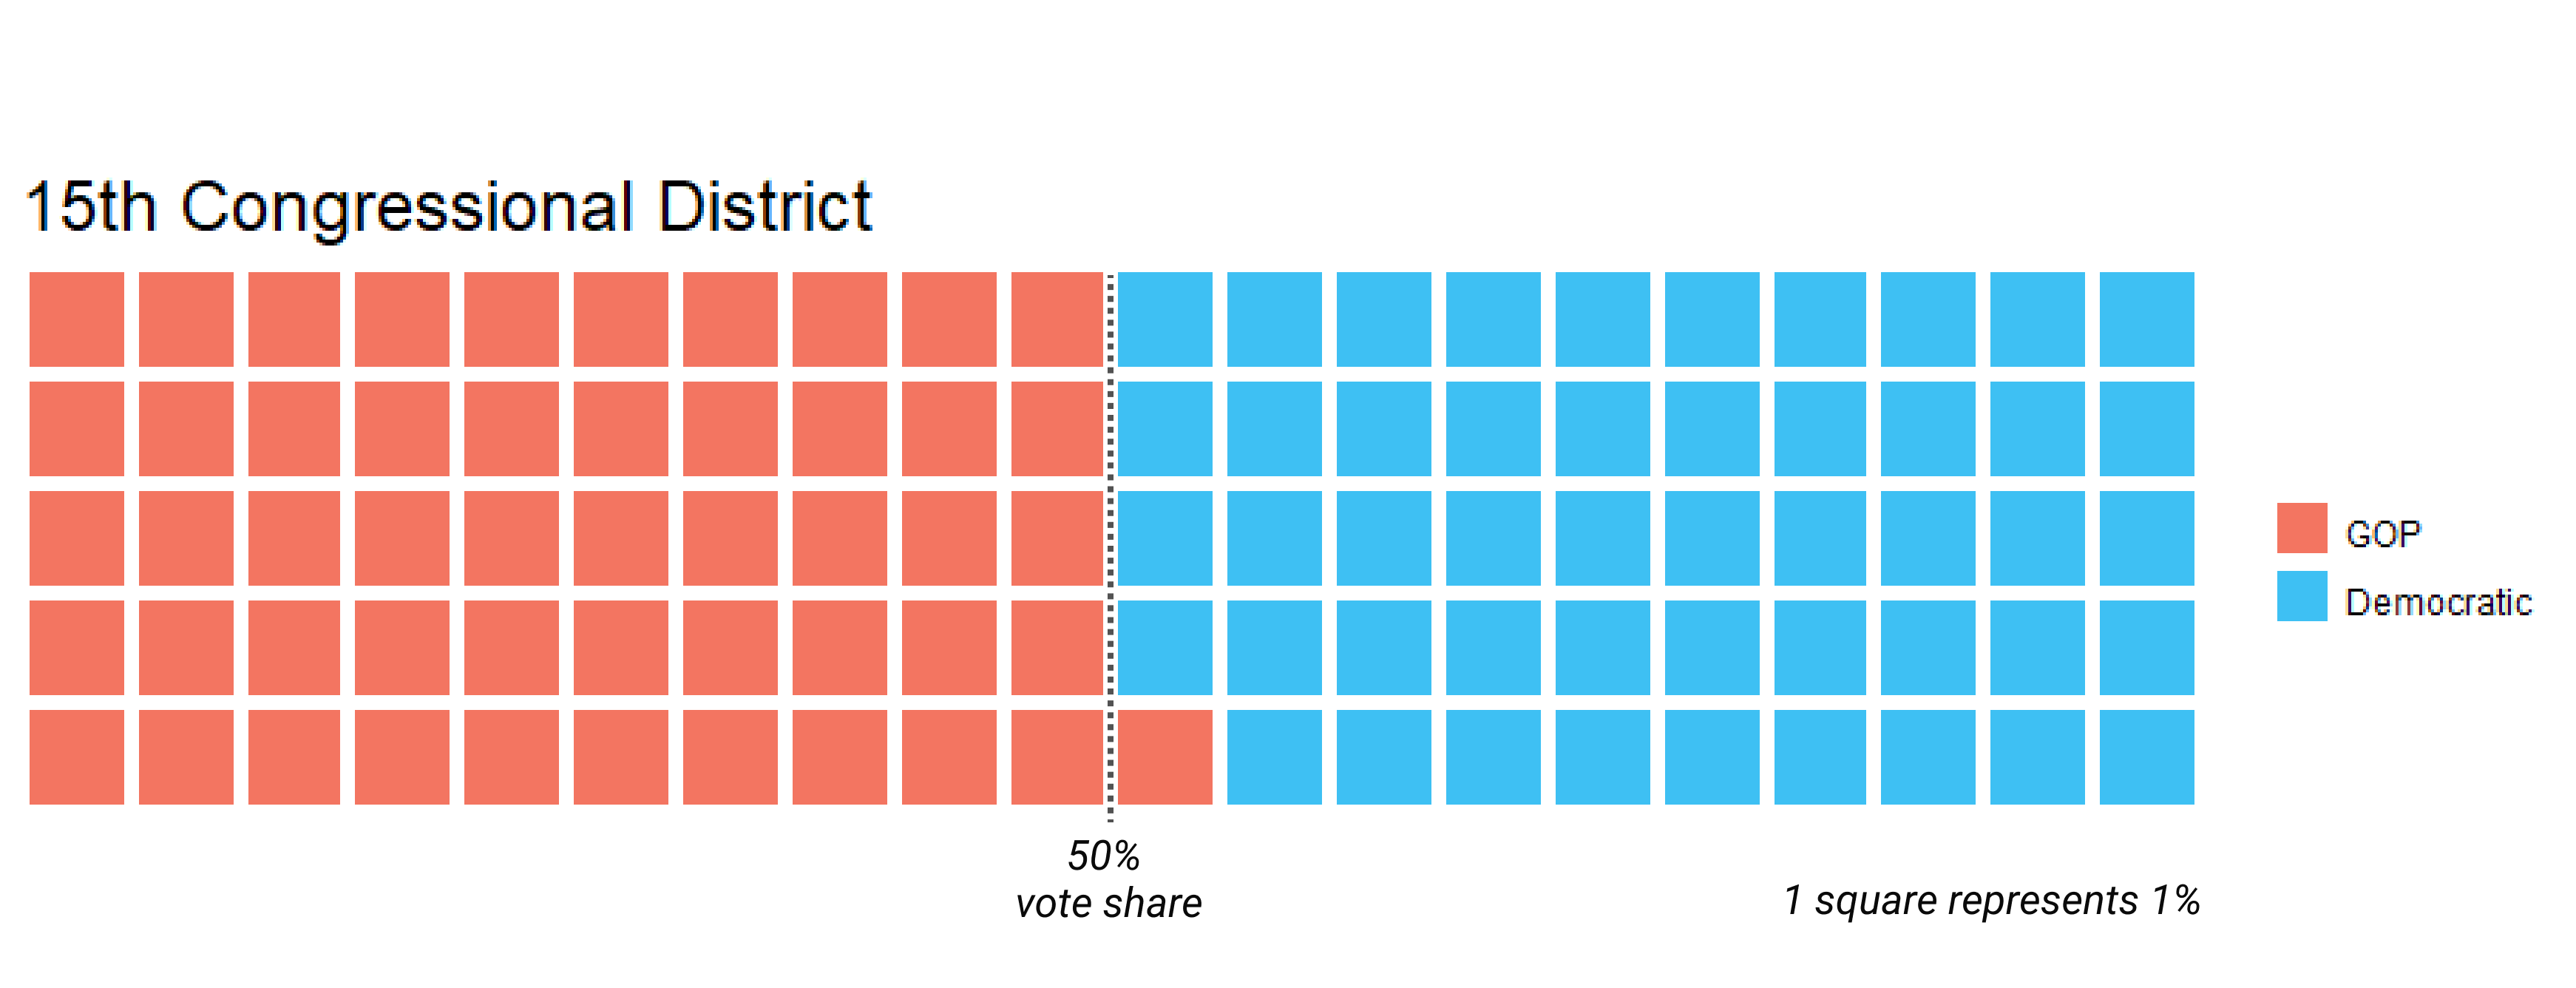 15th district partisan vote share